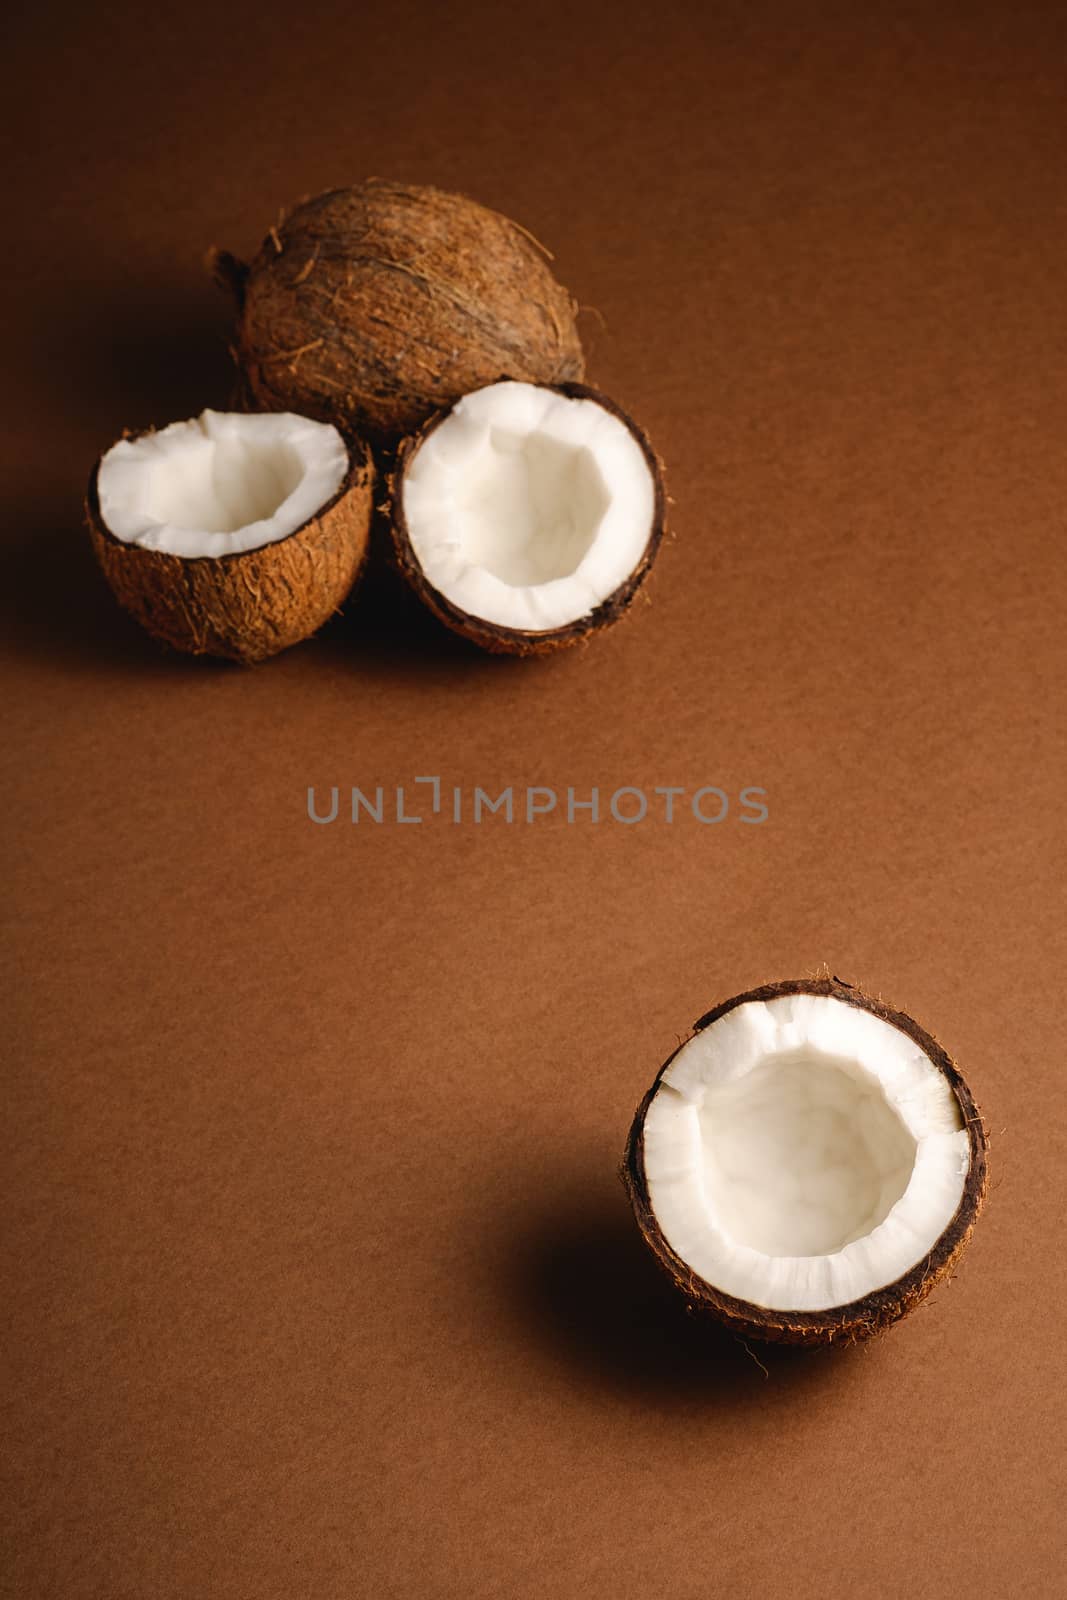 Coconut fruits on brown plain background, abstract food tropical by Frostroomhead